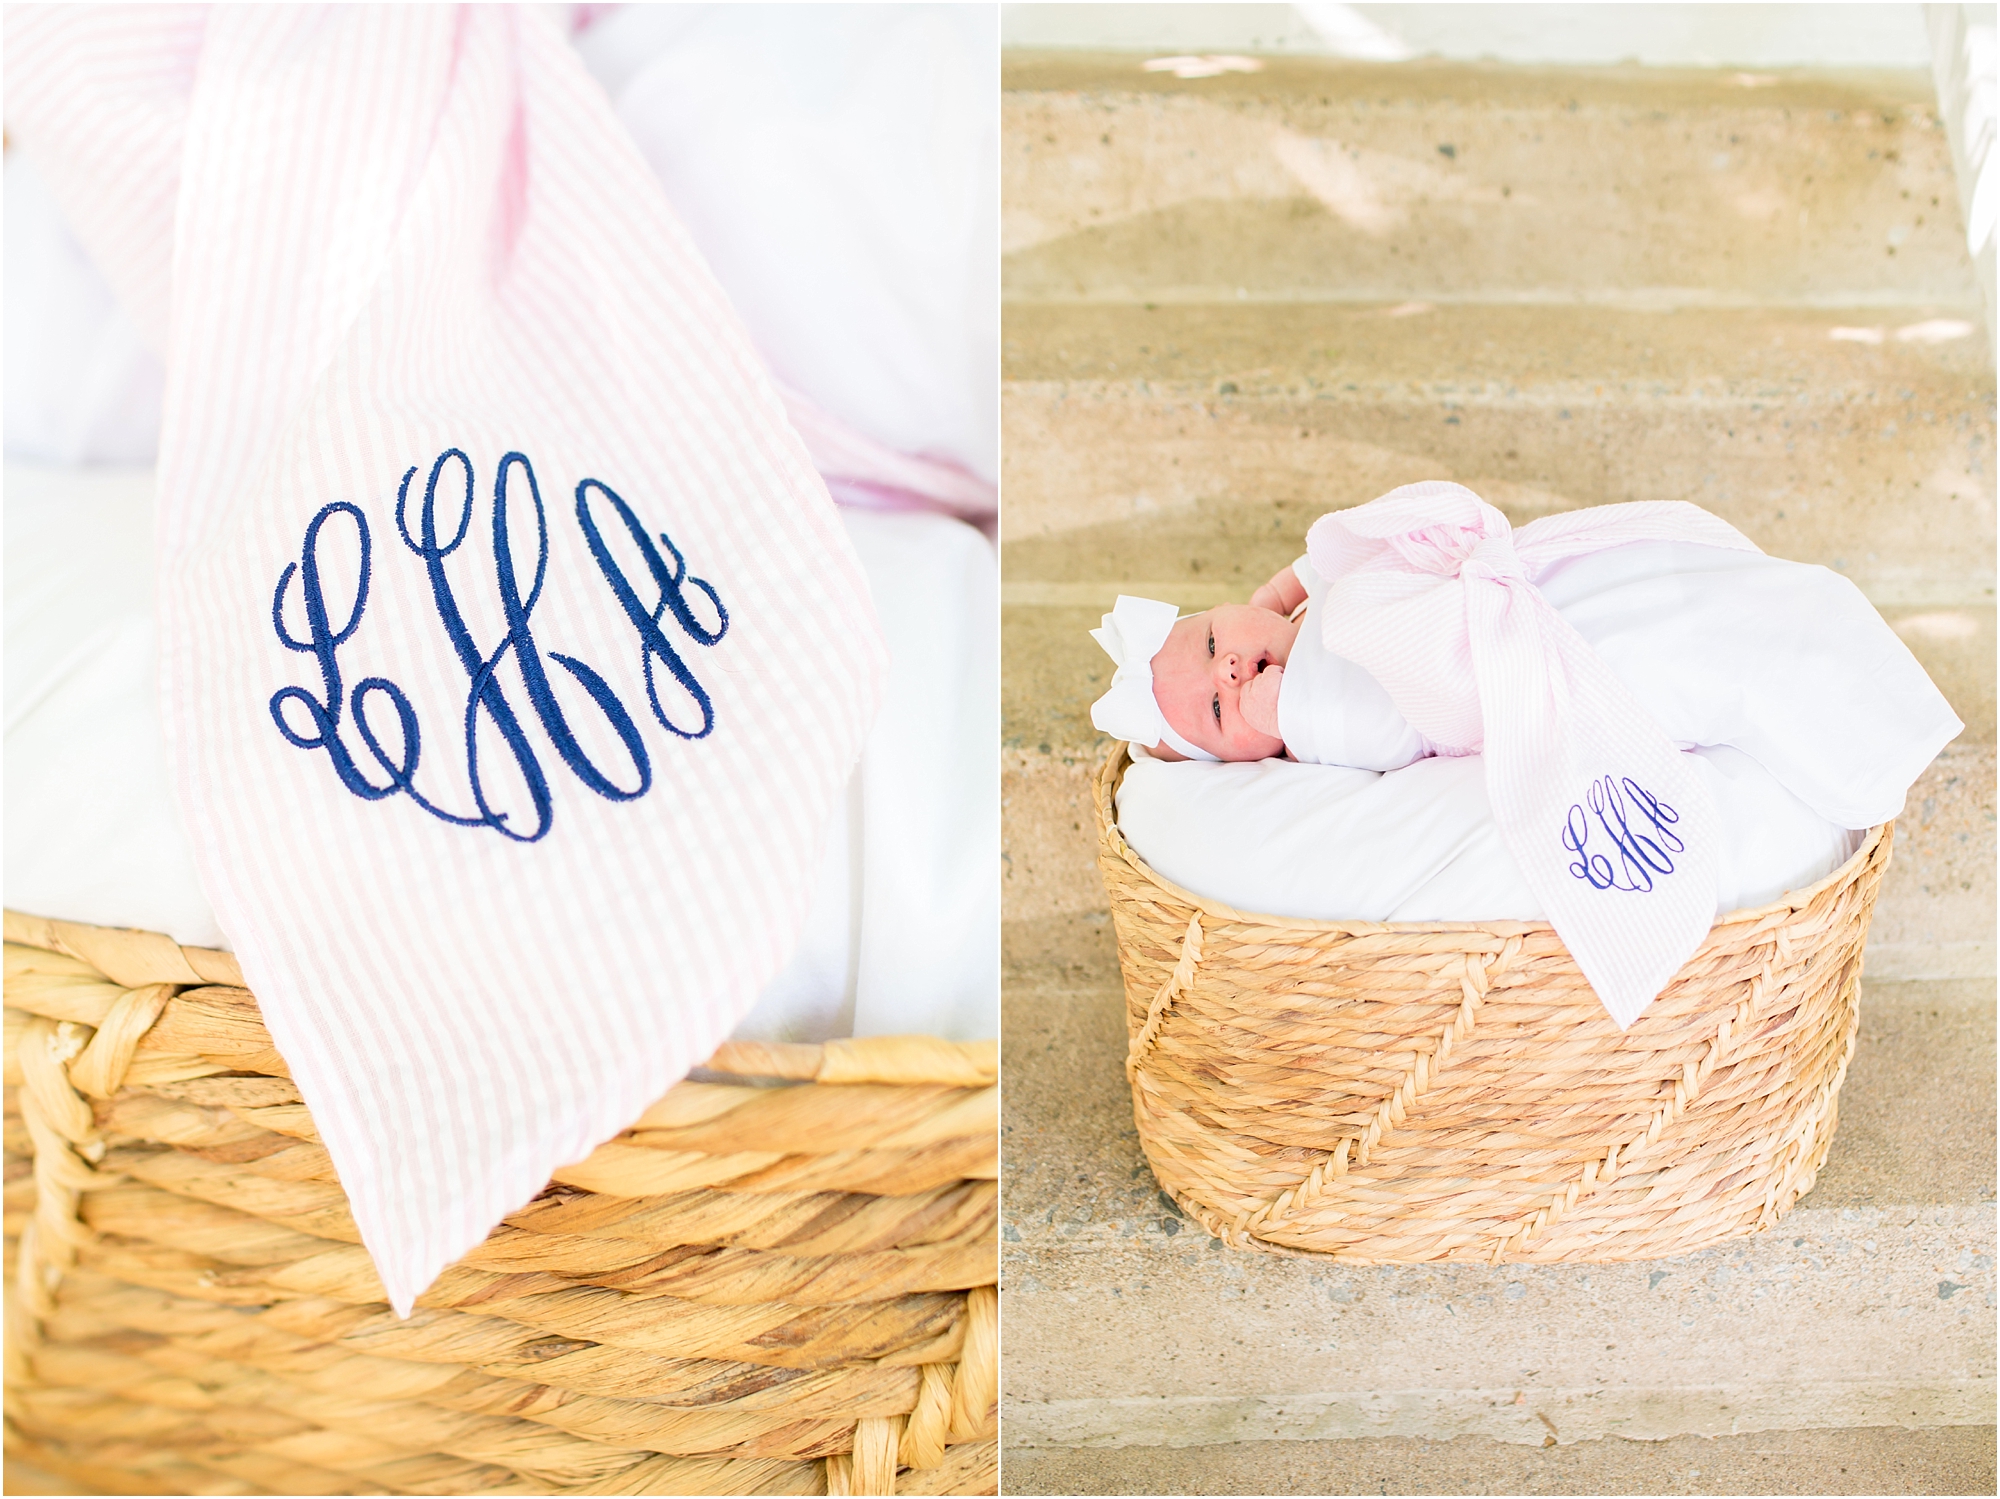  This bow swaddle is the cutest!! Lily is a sweet gift from above. 